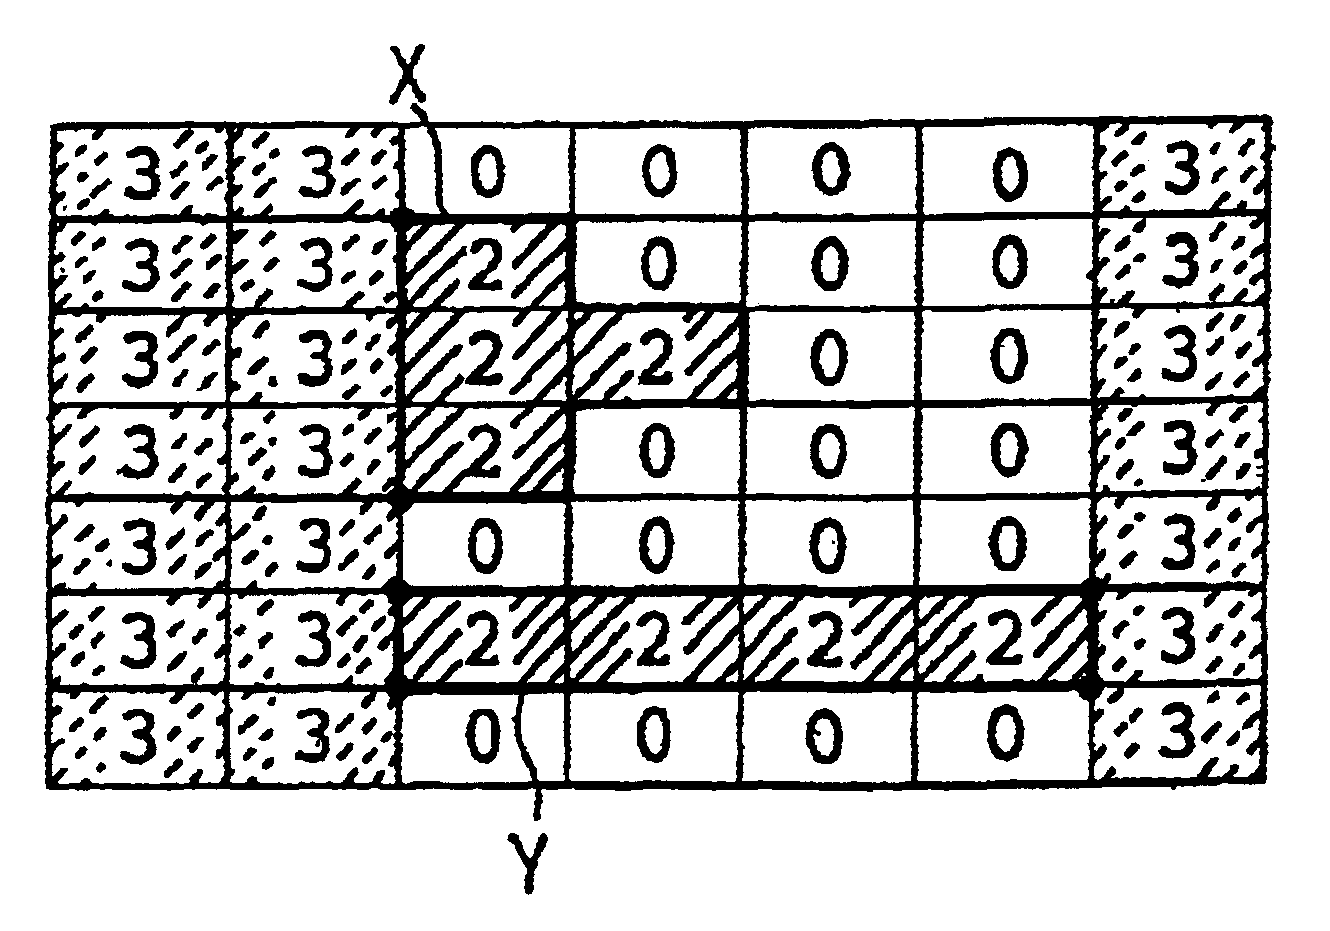 Method of detecting pattern defects